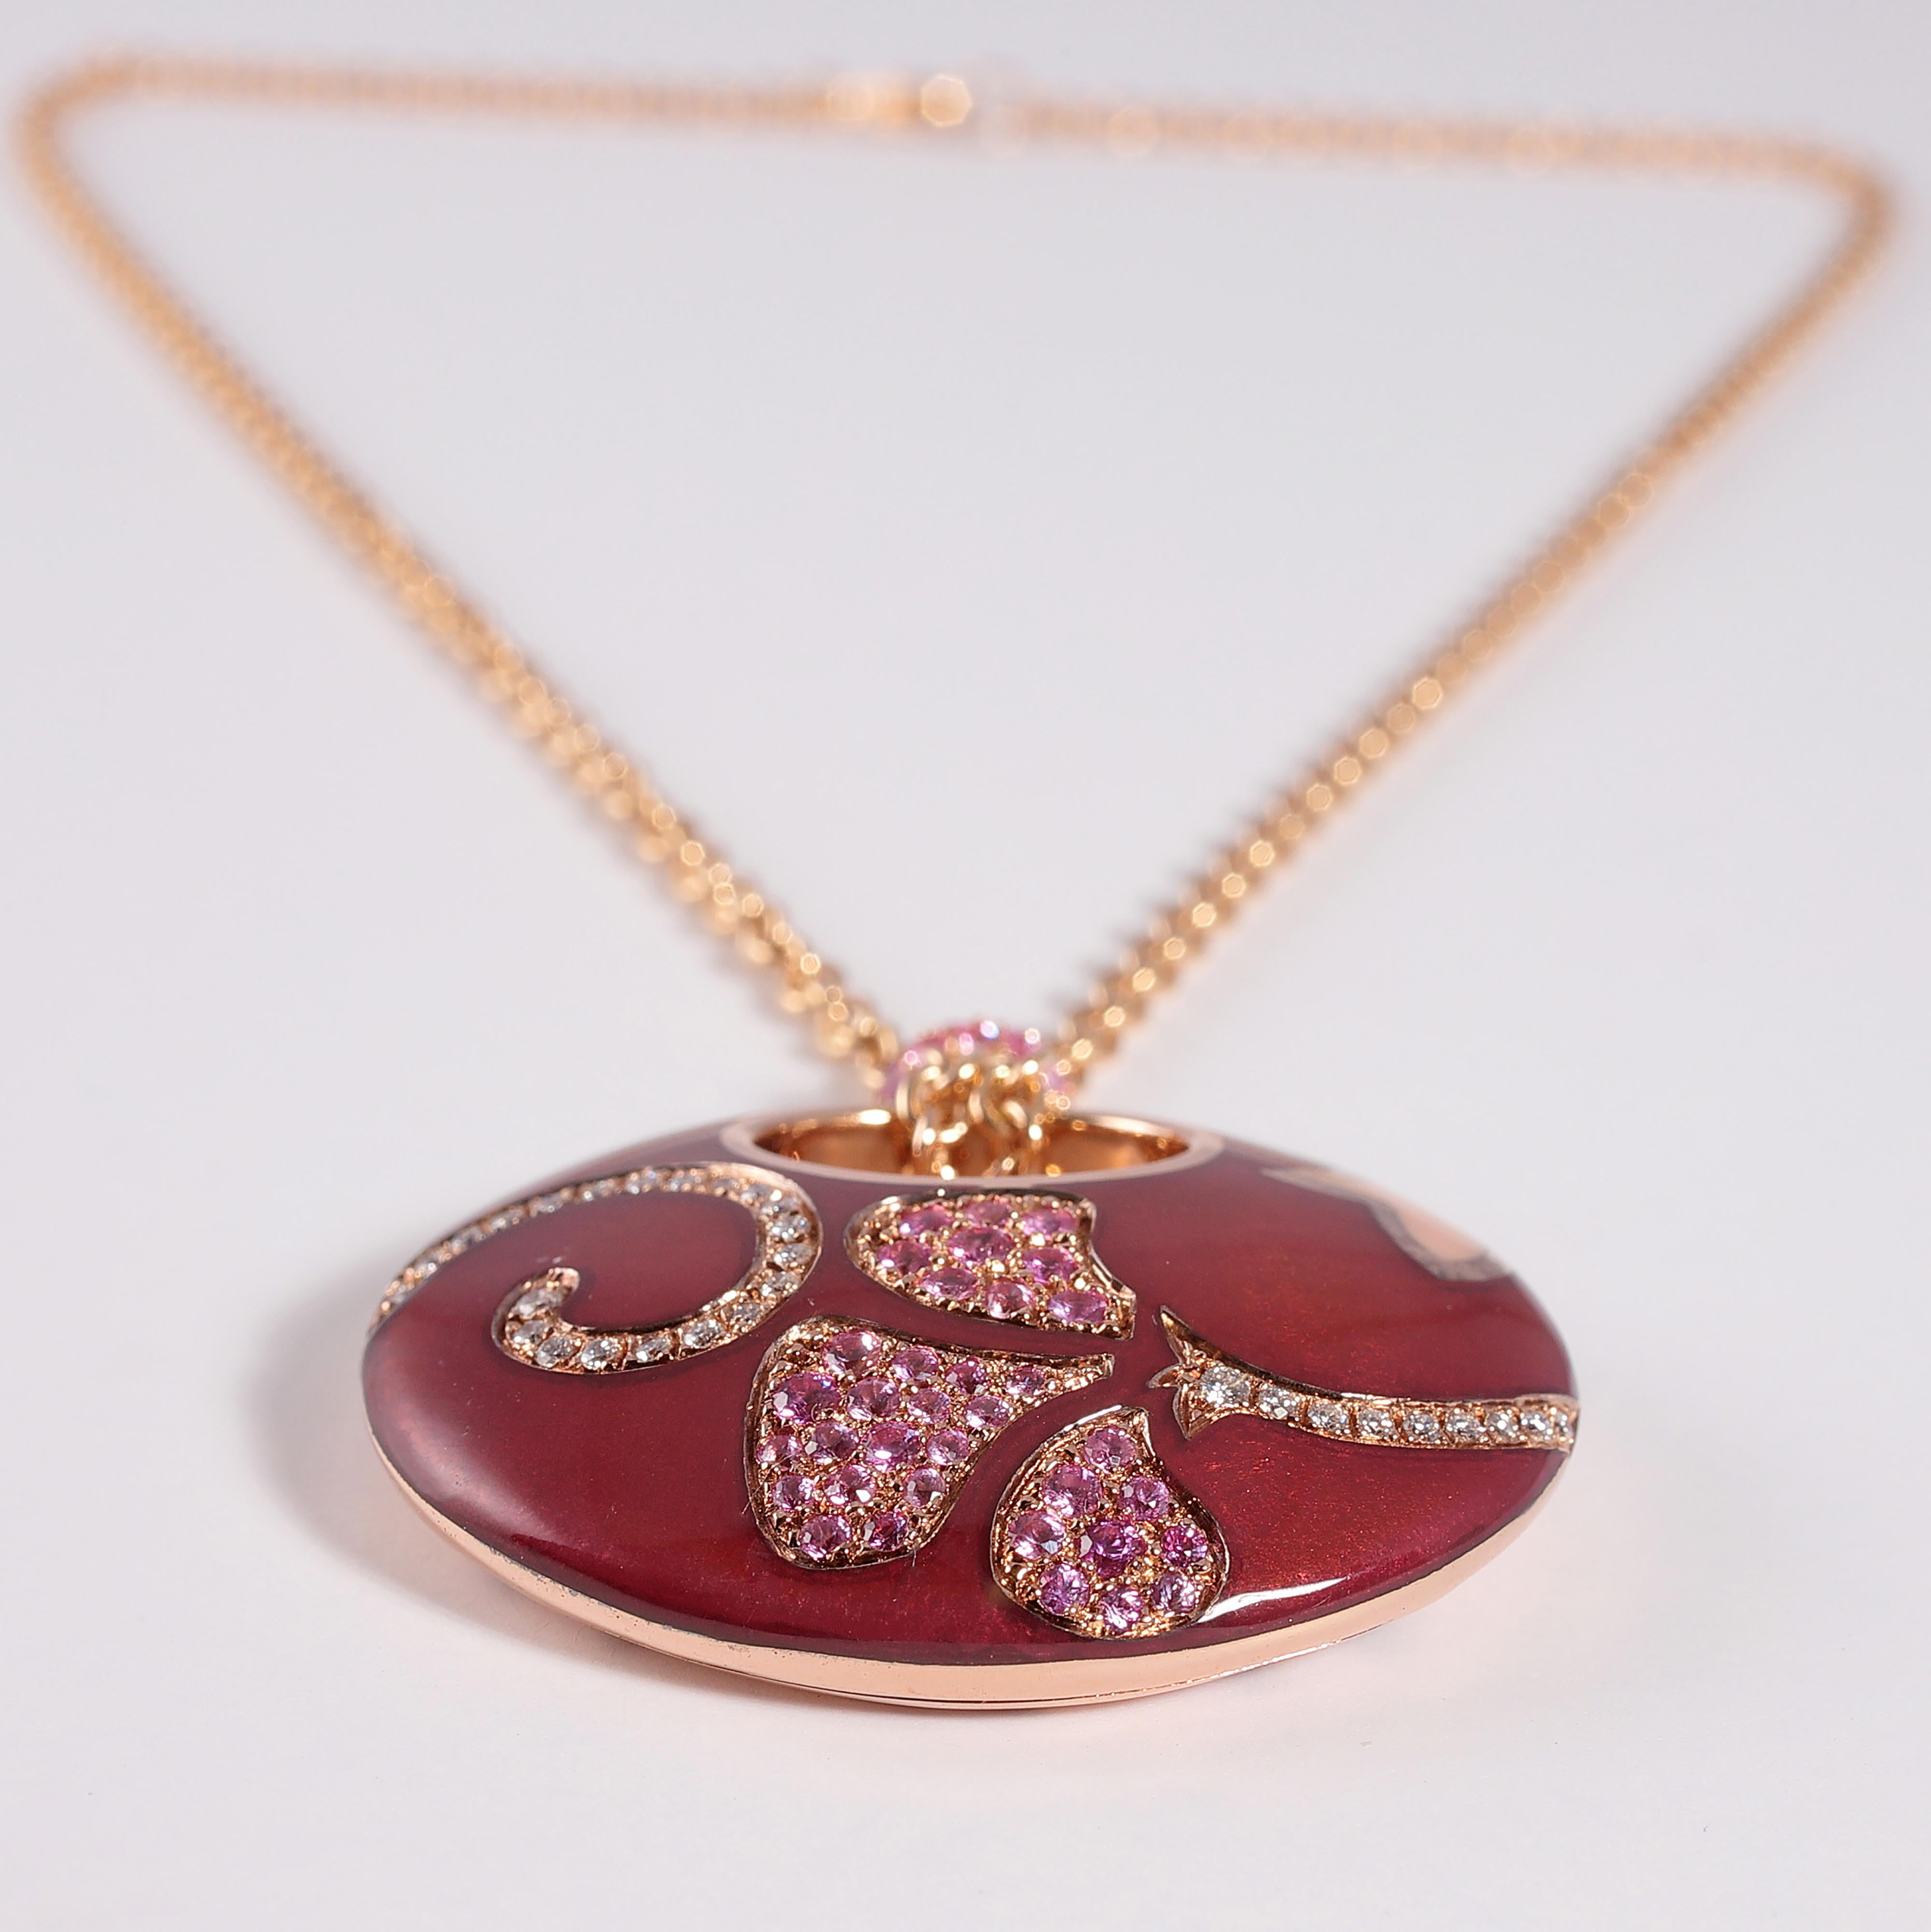 This beauty is from the Petali Collection by La Nouvelle Bague and features approximately 1.00 carat of pink sapphires and approximately 0.25 carats of diamonds.  The pendant measures 1 1/2 inches in width x 1 1/4 inches in length.